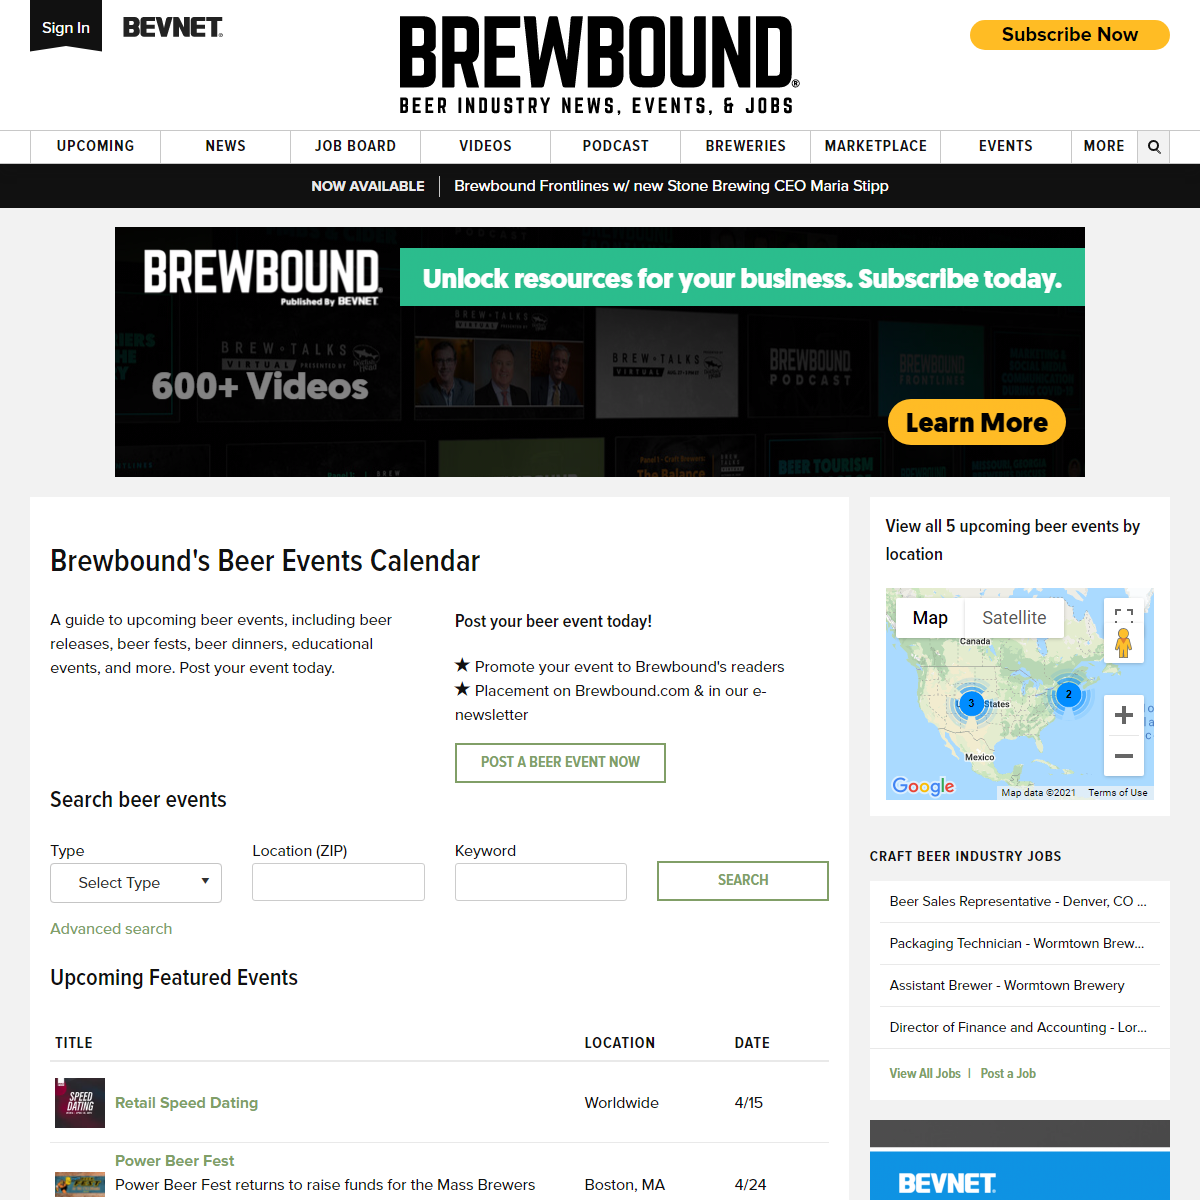 A complete backup of https://www.brewbound.com/beerevents